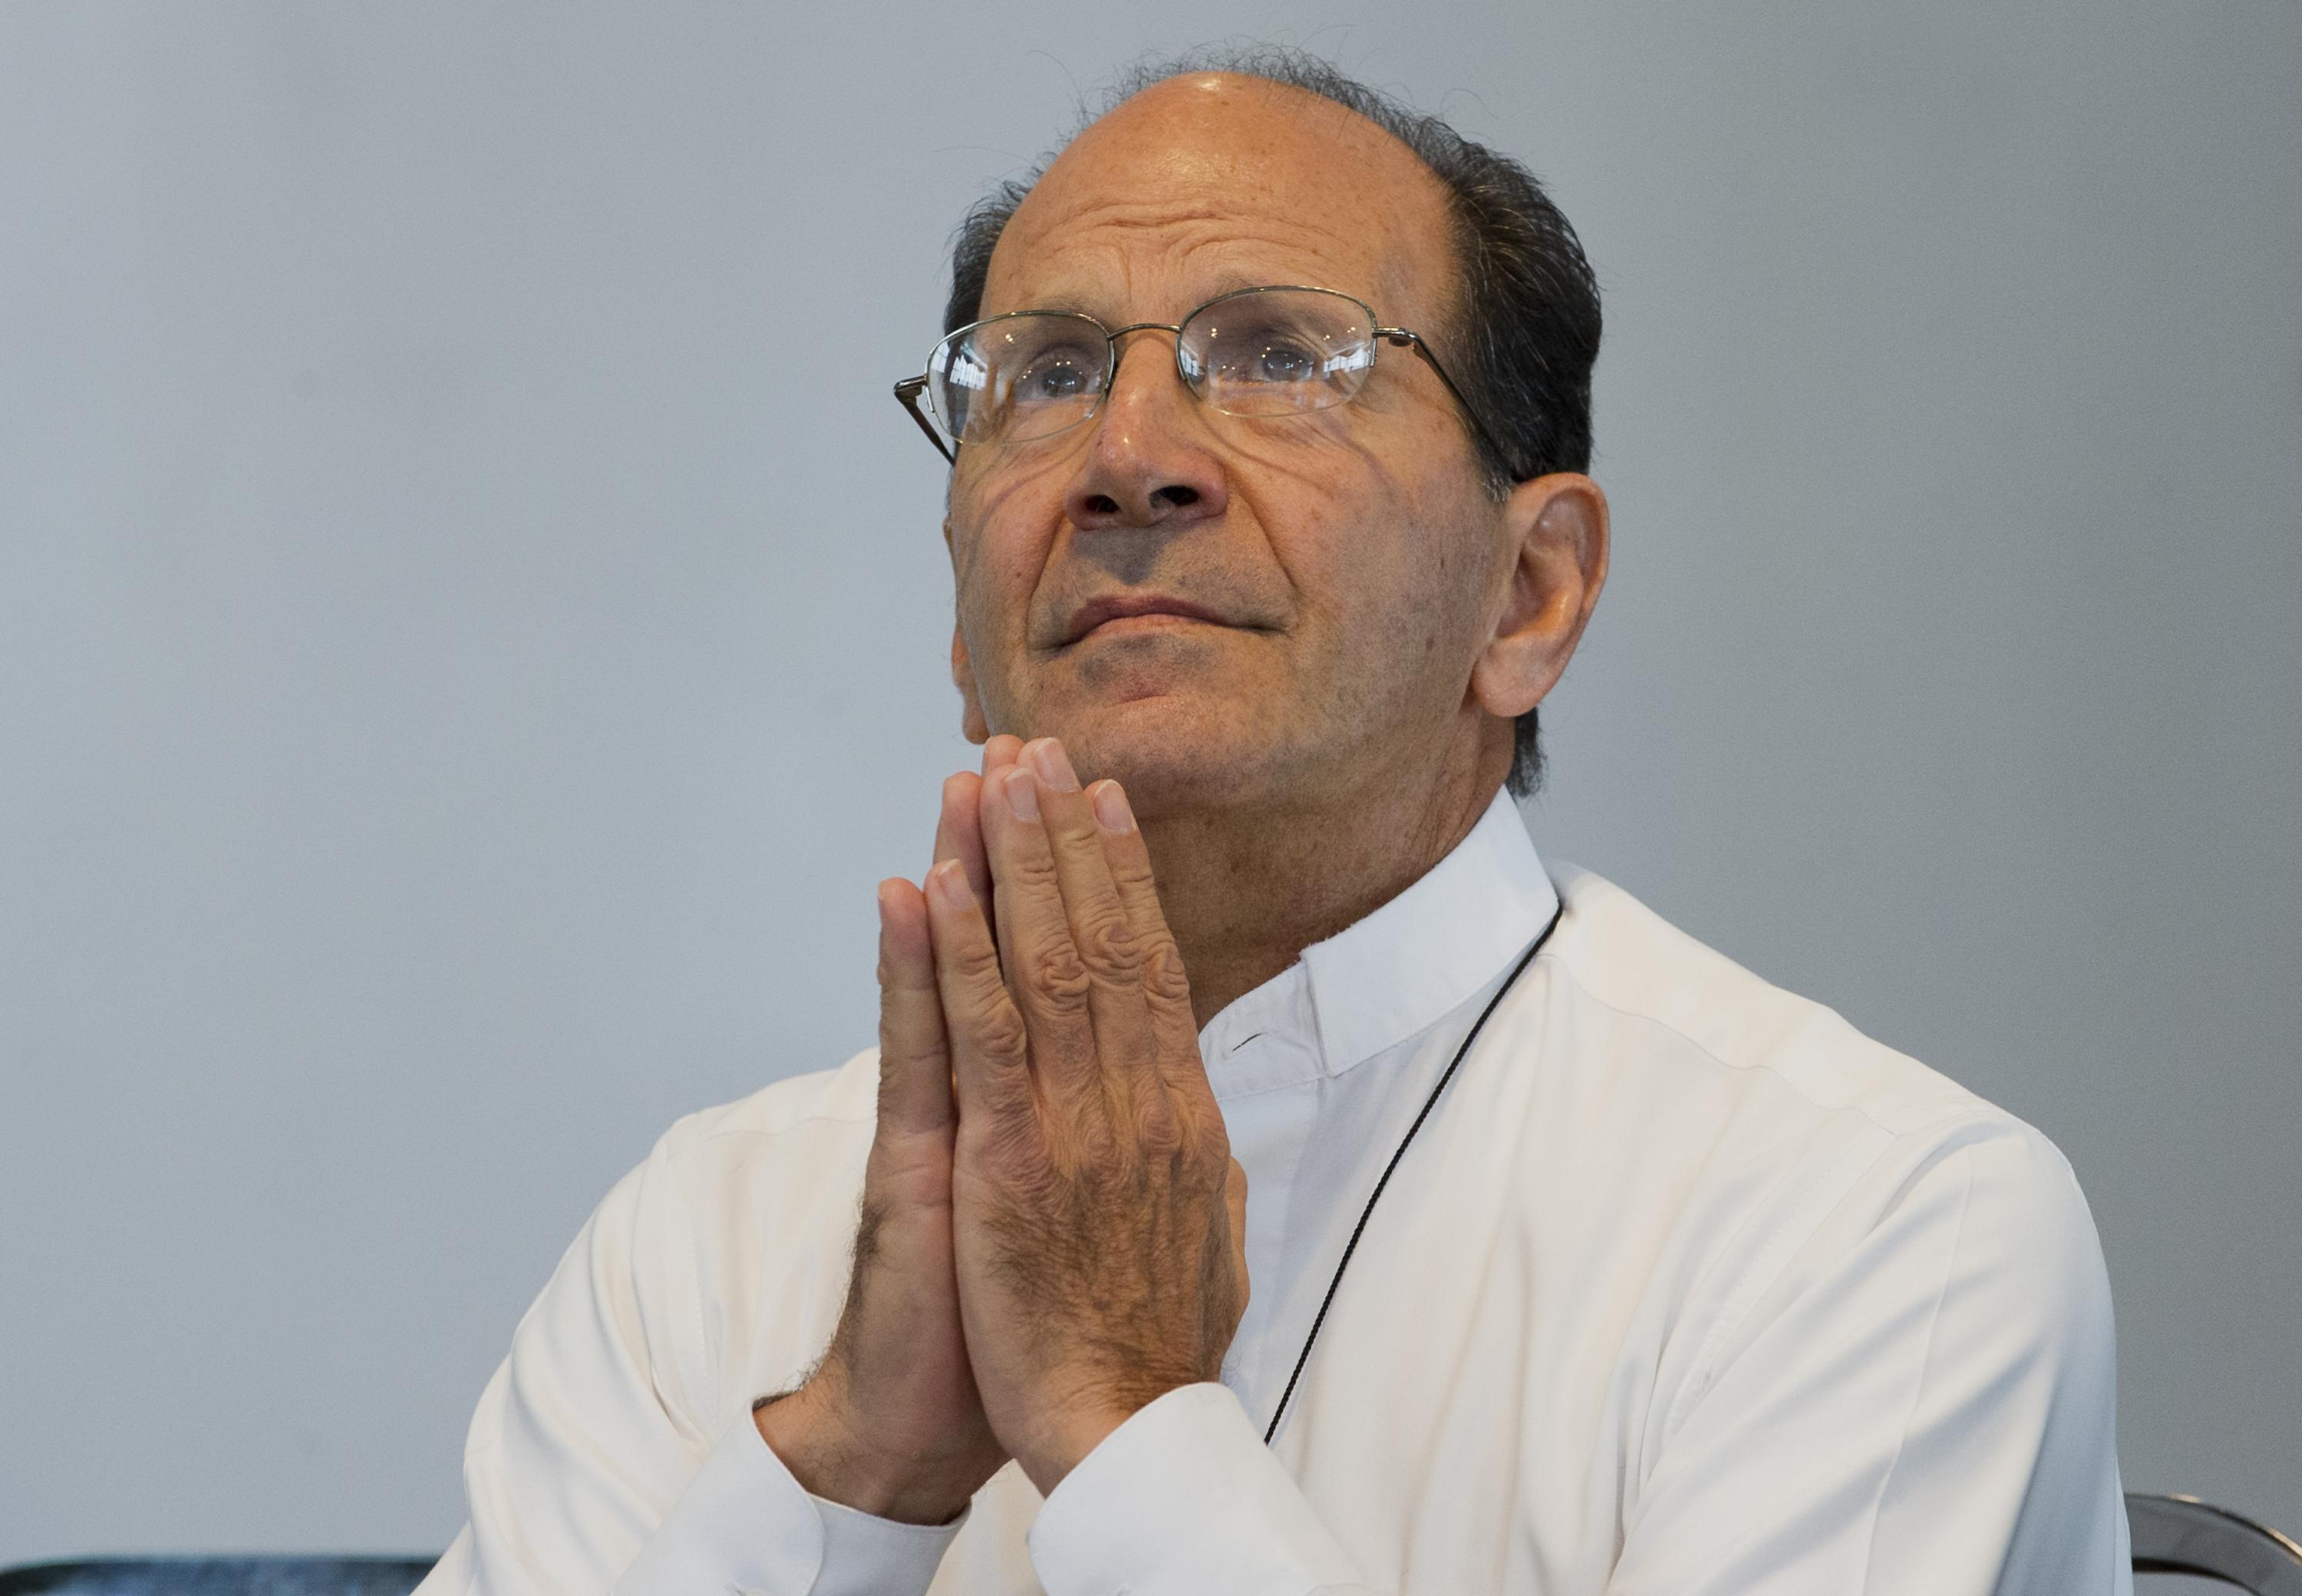 The Catholic presbyter and priest Alejandro Solalinde before speaking at a press conference in Mexico City on June 10, 2012. Foto de AFP: Alfredo Estrella.